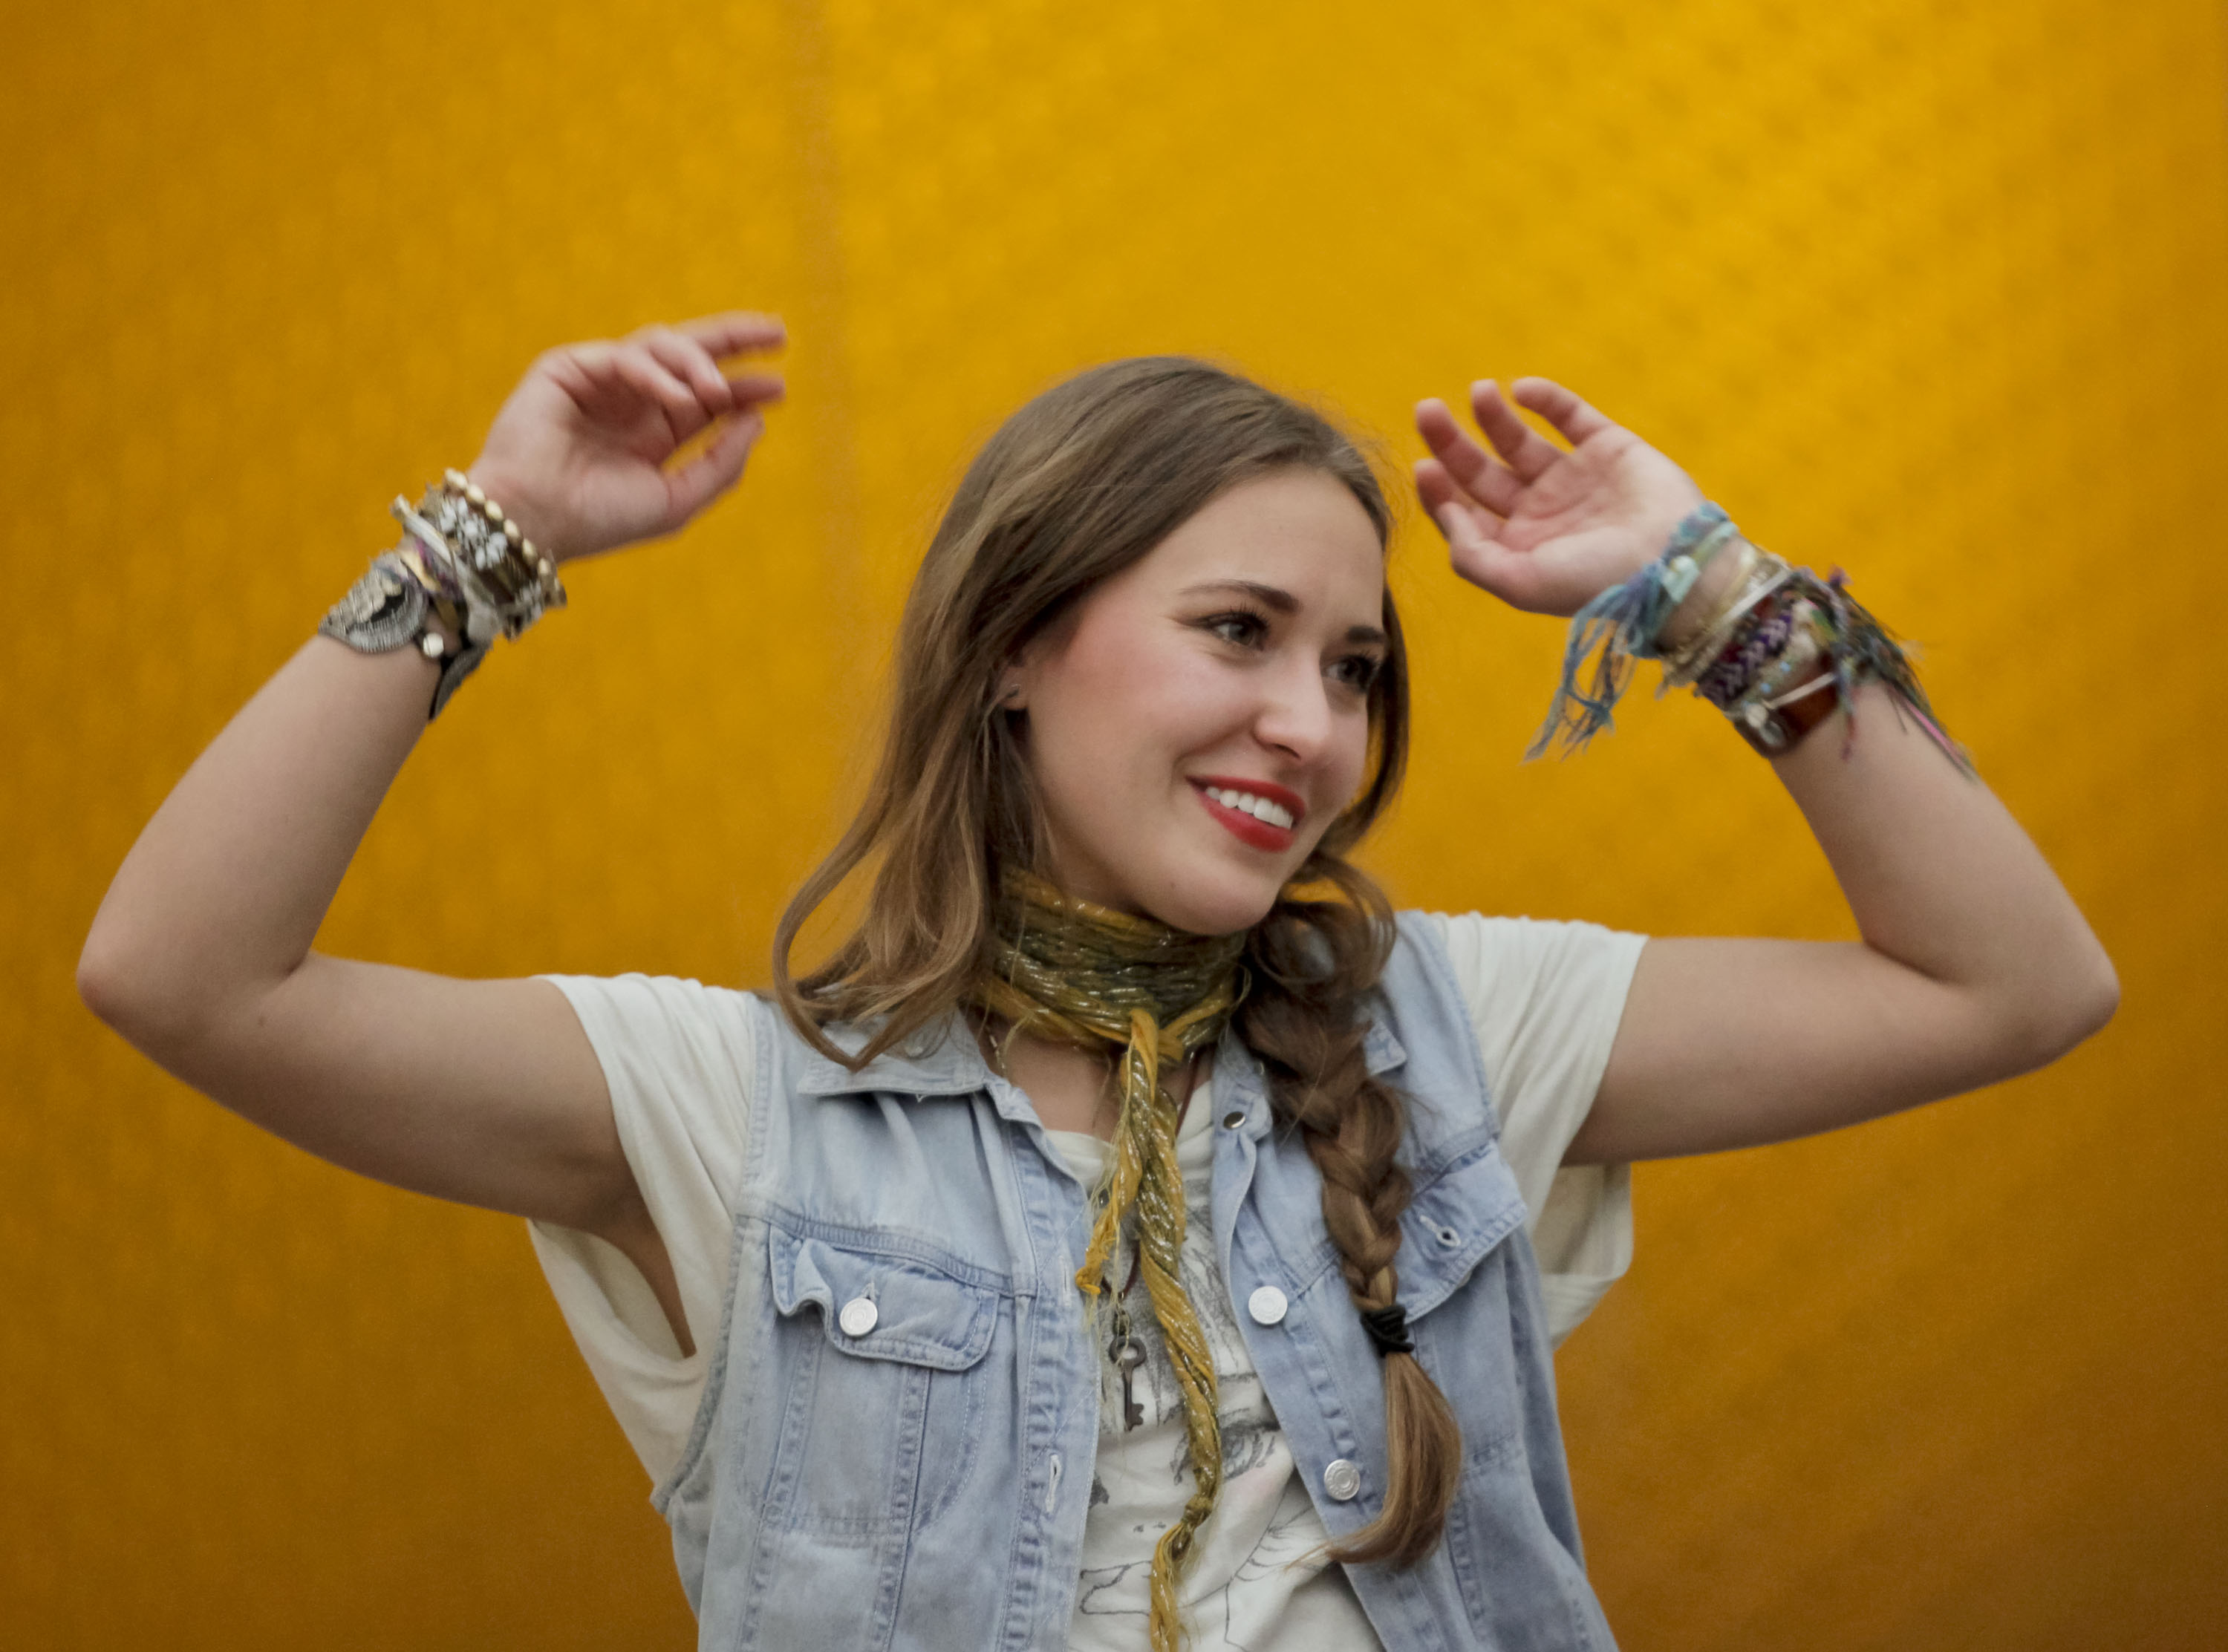 Rogers & Cowan Hosts Special In-Office Performance With Lauren Daigle